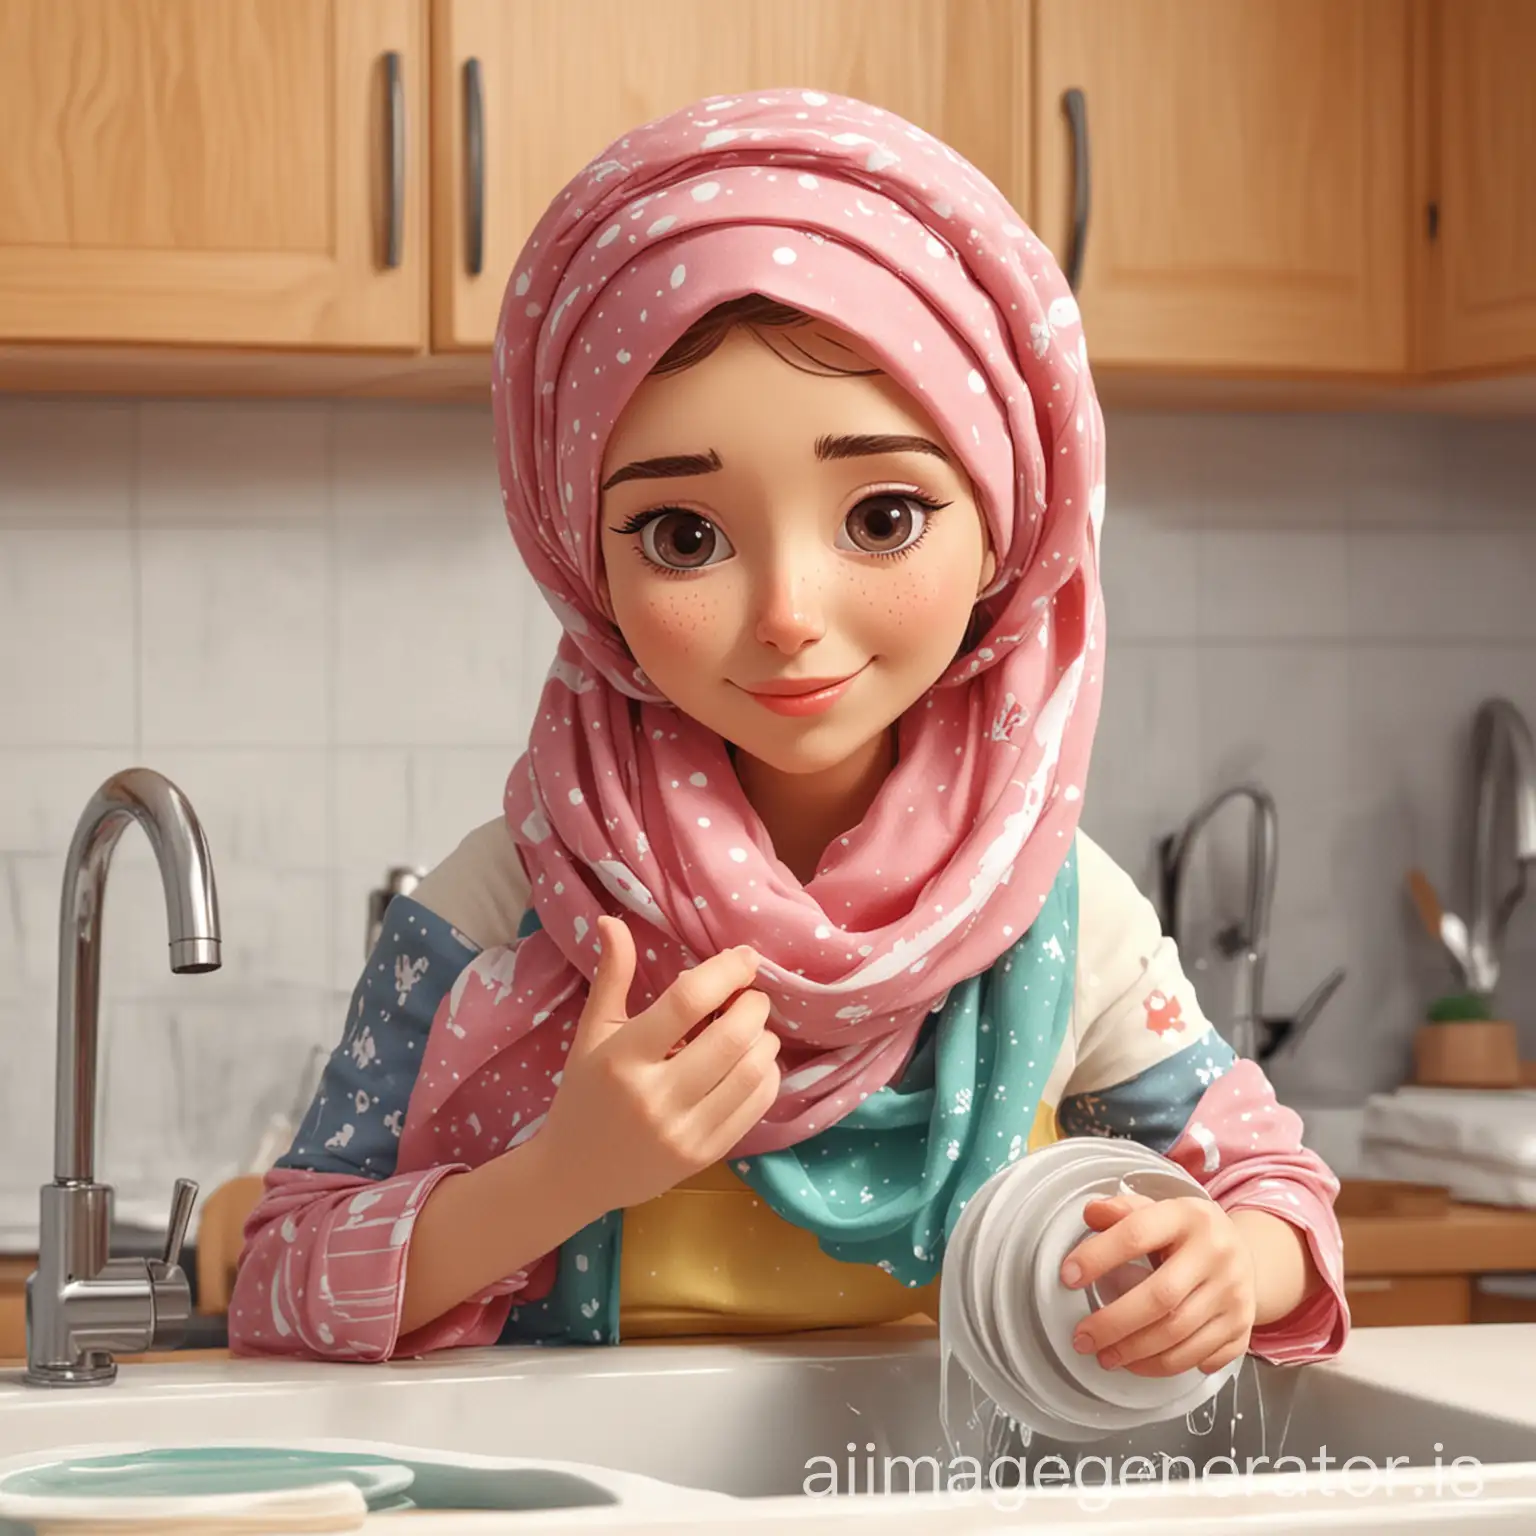 a cartoon woman scarf on her head.Washing dishes with her child